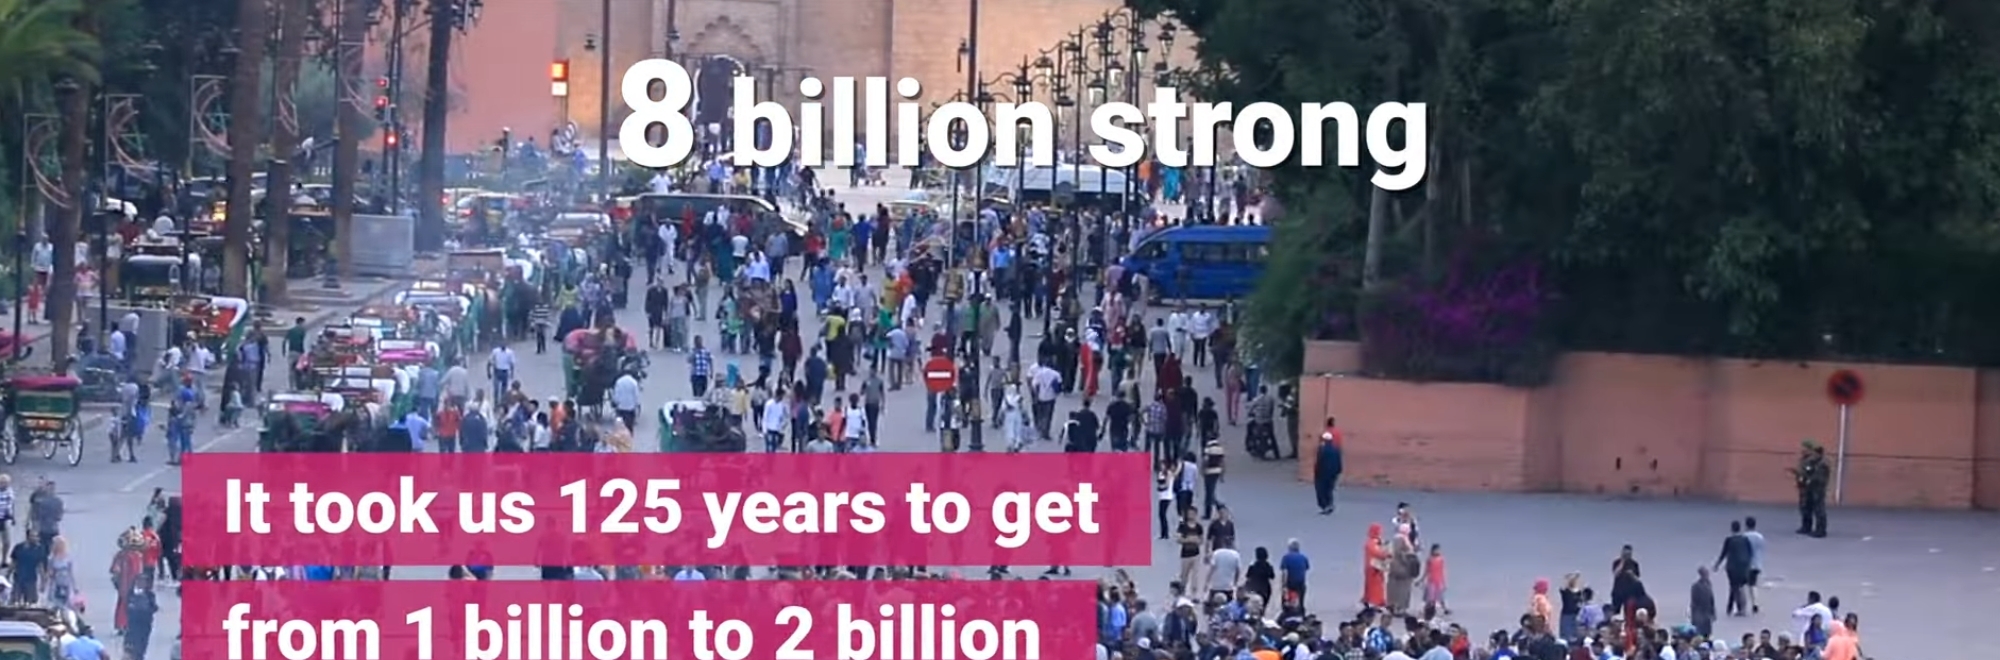 The UN celebrates the infinite possibilities of the global population reaching 8 billion